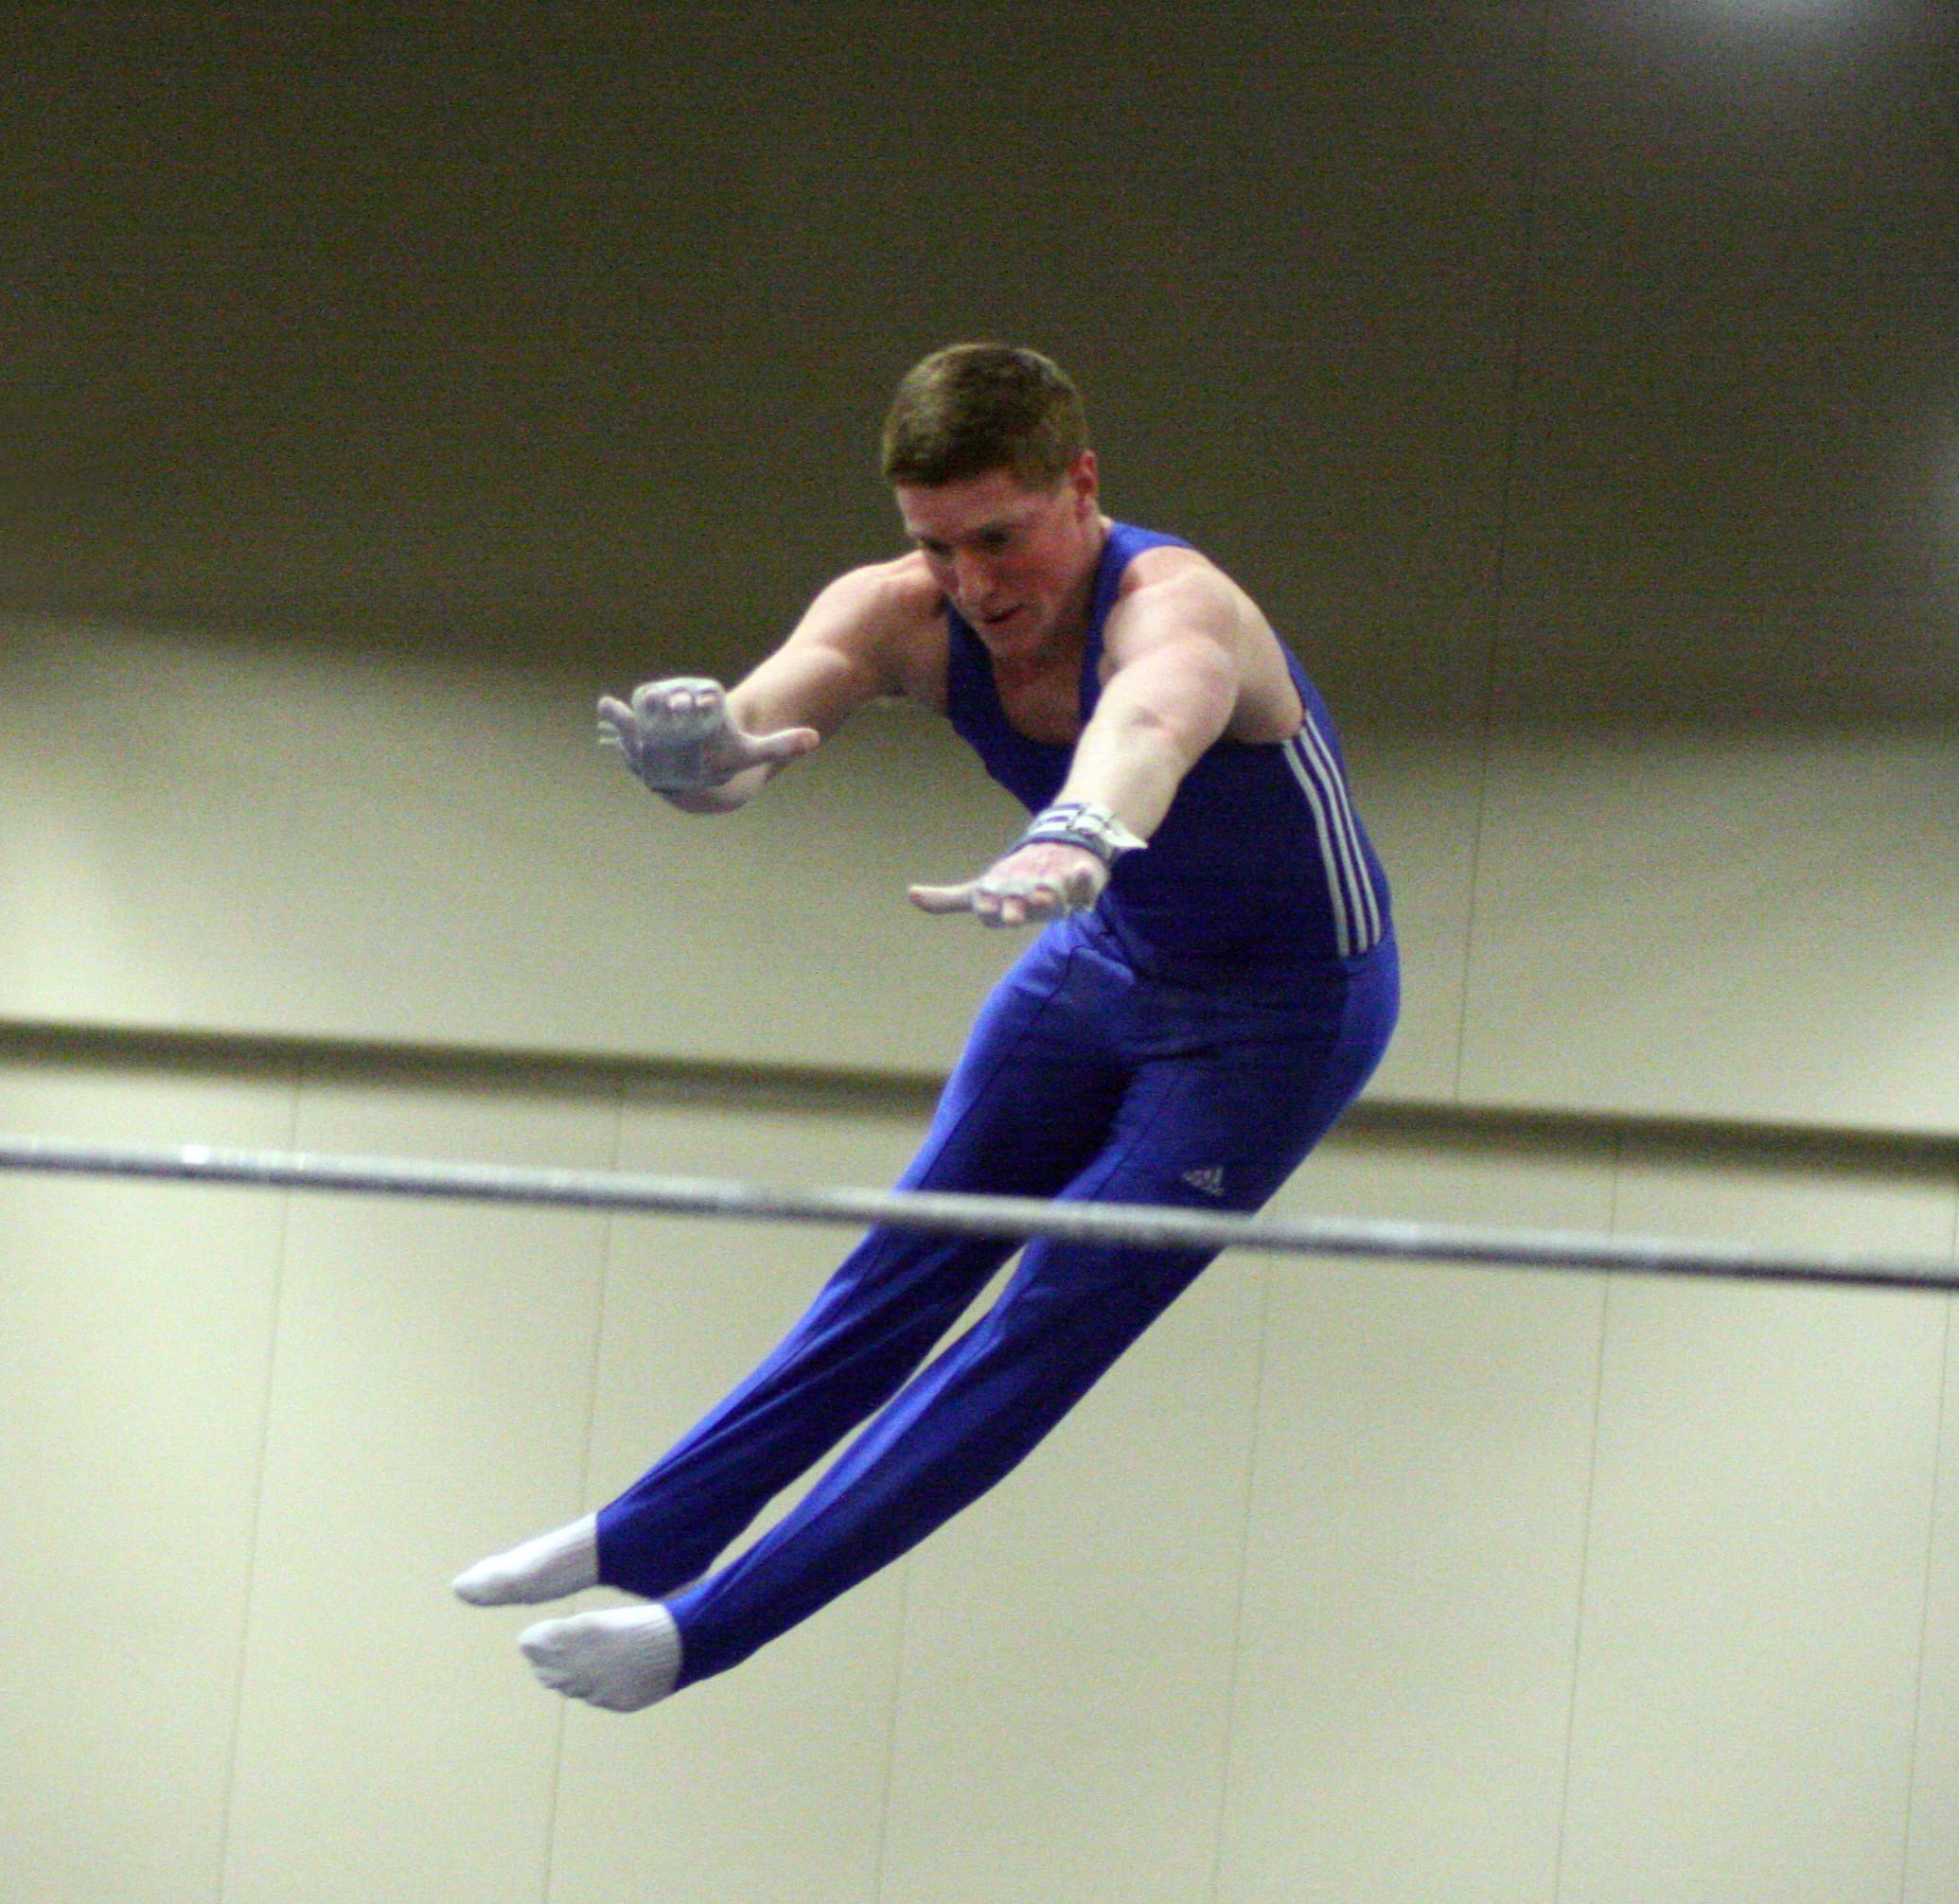 VEGA's Trace Jacquot, of Hockinson, flings himself over the high bar and catches it on the other side during the Level 10 USAG Washington state men's gymnastics meet Saturday, at the Clark County Event Center.